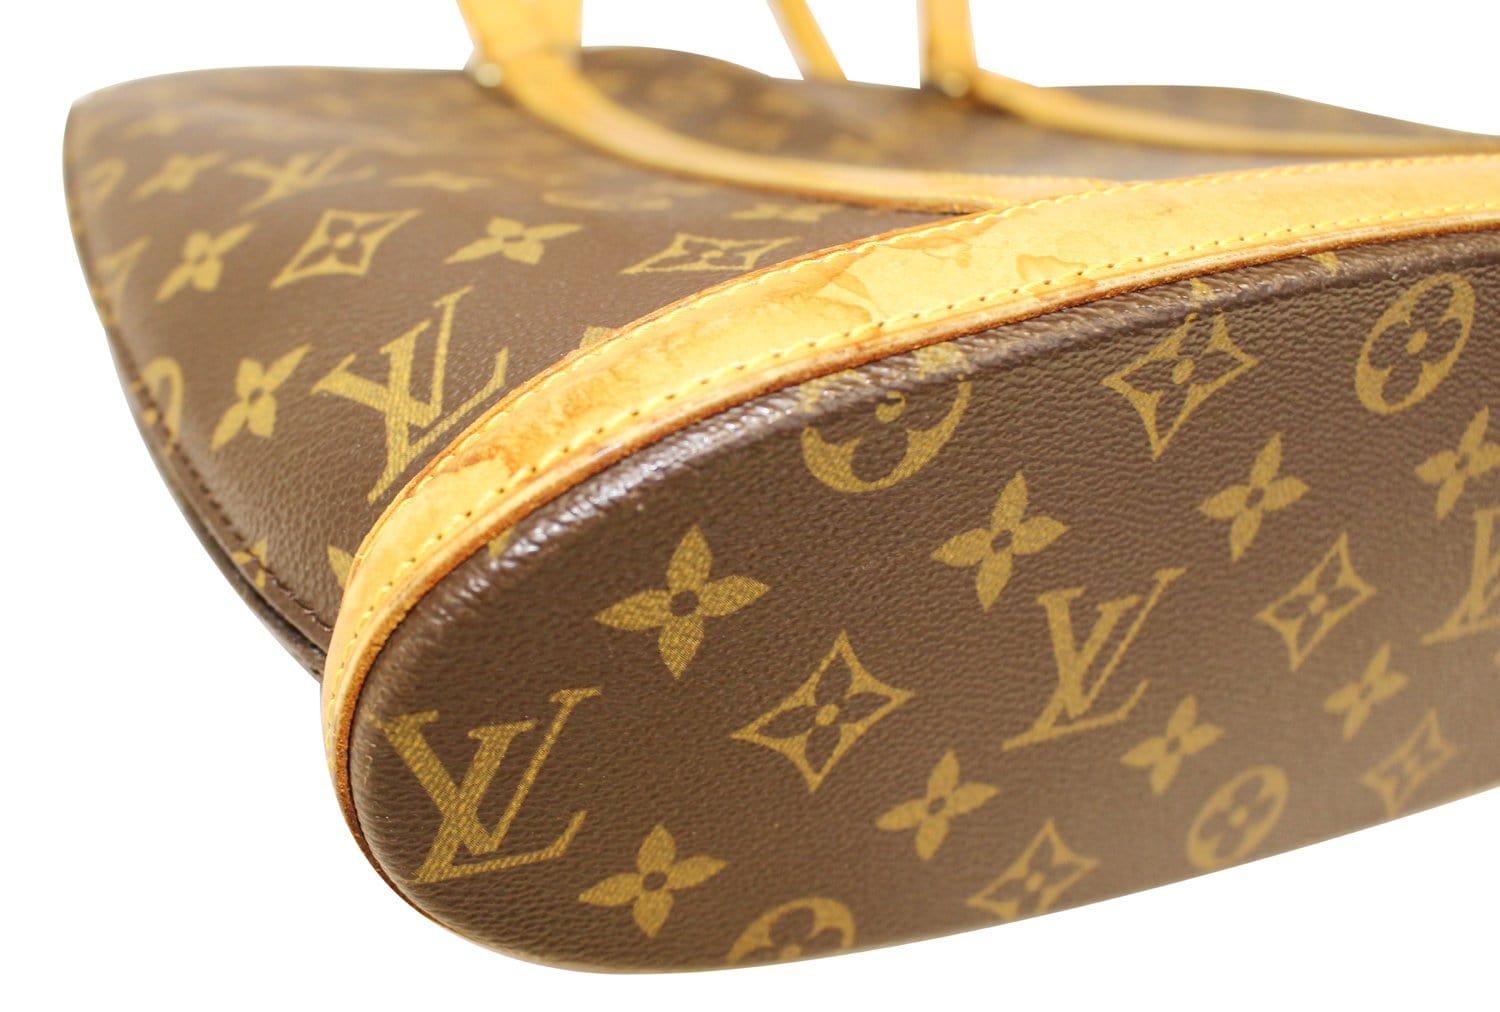 Pre-Owned Louis Vuitton Babylone BB 213484/92